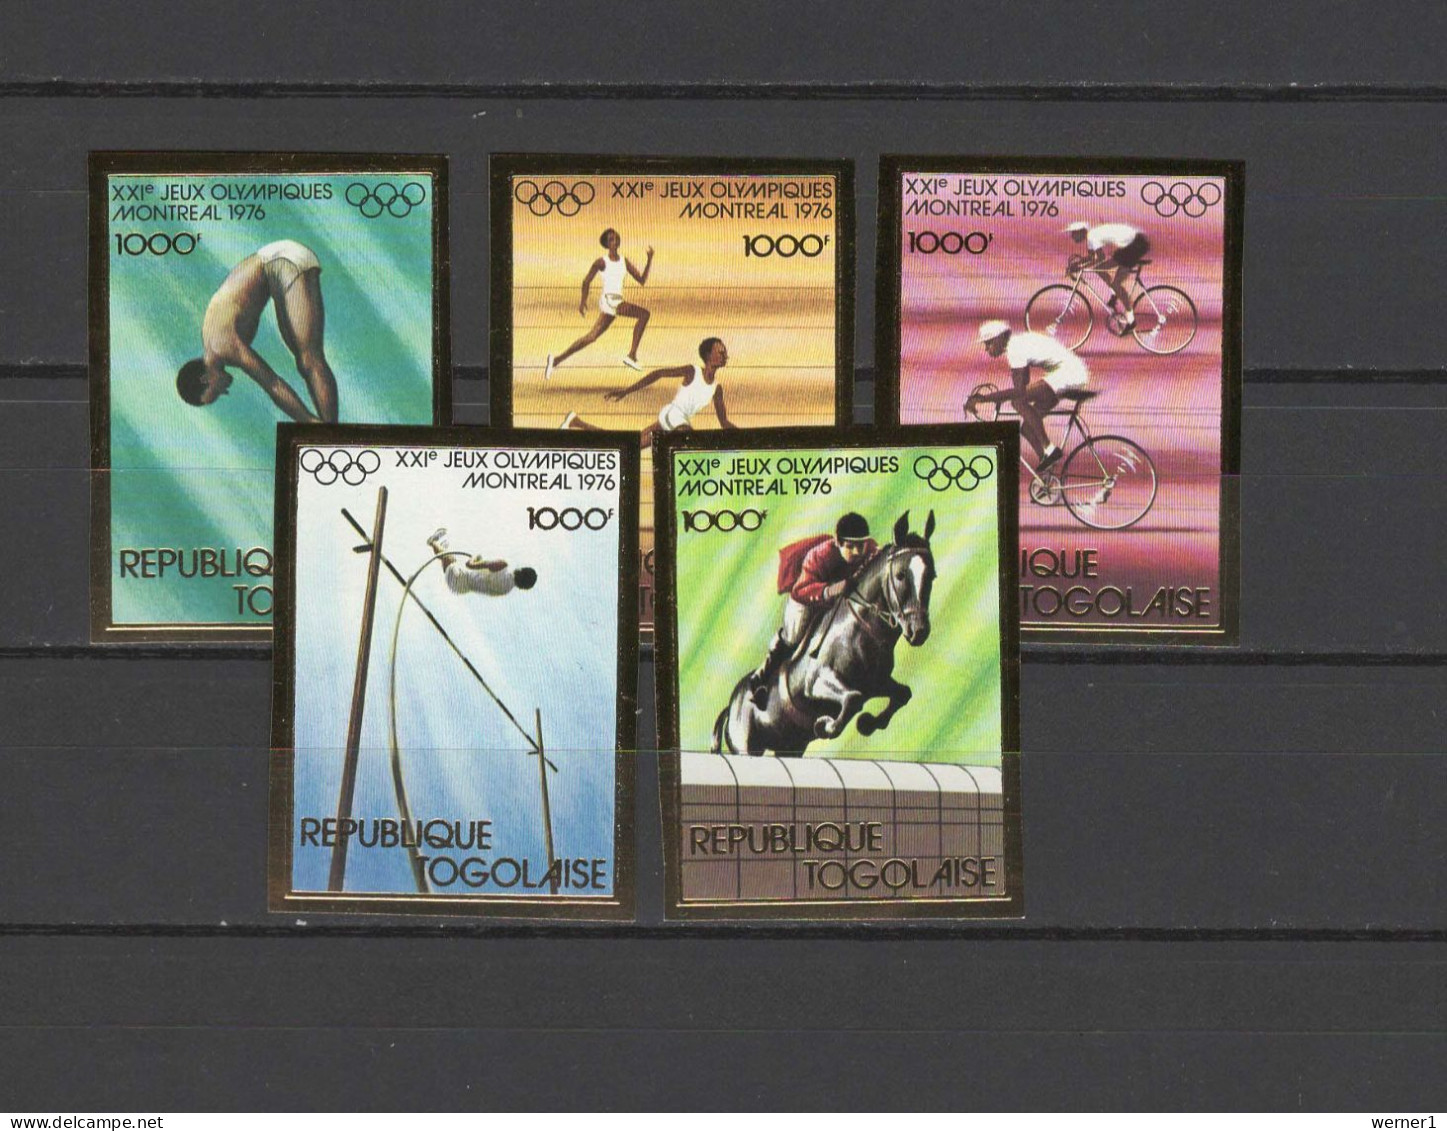 Togo 1976 Olympic Games Montreal, Athletics, Cycling, Equestrian Set Of 5 Imperf. MNH -scarce- - Ete 1976: Montréal